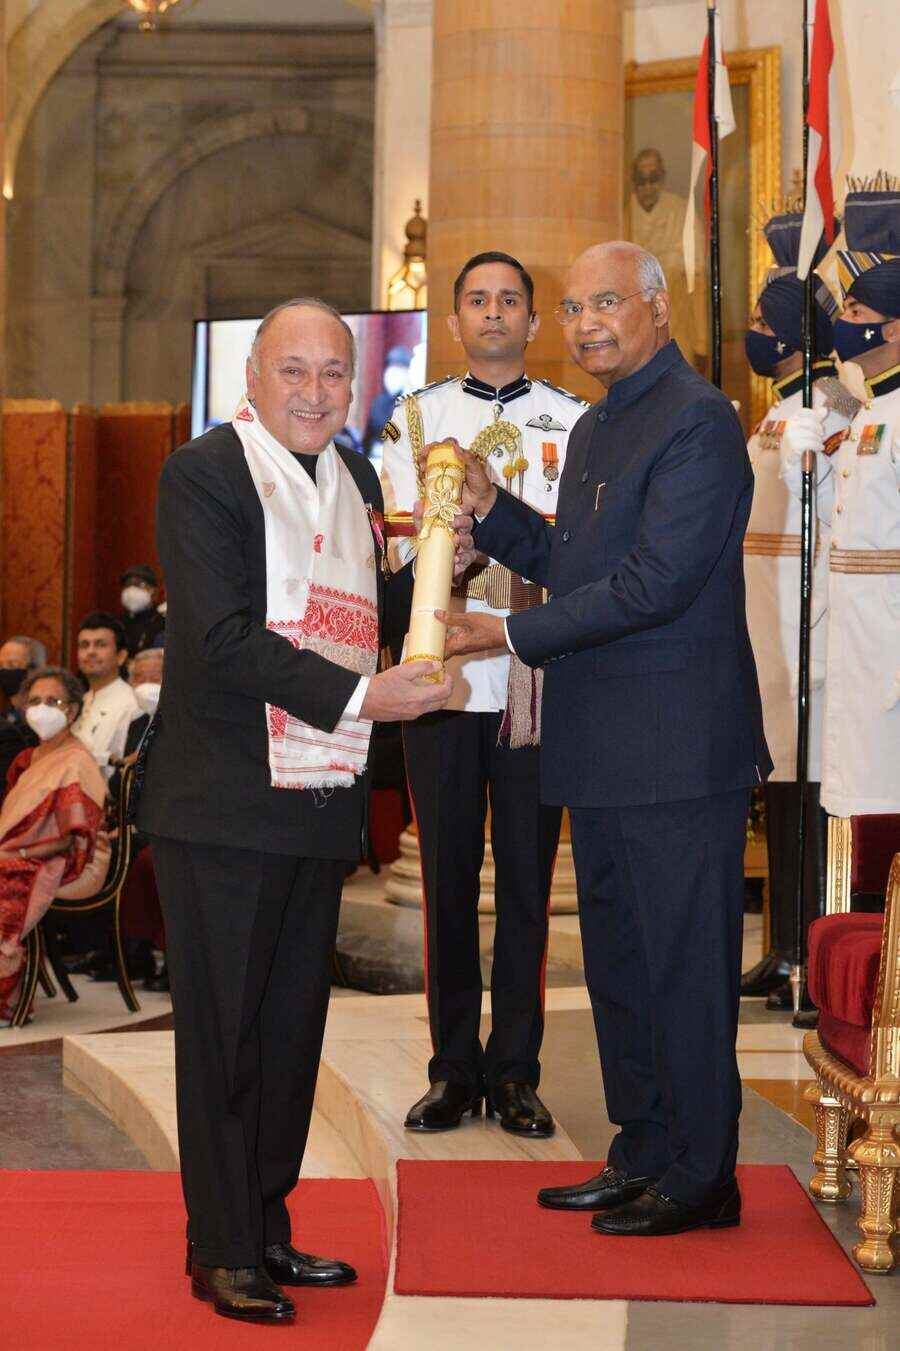 HONOUR: Veteran actor Victor Banerjee receives the Padma Bhushan, India’s third-highest civilian award, from President Ram Nath Kovind at Rashtrapati Bhavan in New Delhi on Monday, March 28. The actor, who has won the National Award three times, was among 17 people who received the accolade. Banerjee was also recently awarded the Satyajit Ray Lifetime Achievement Award